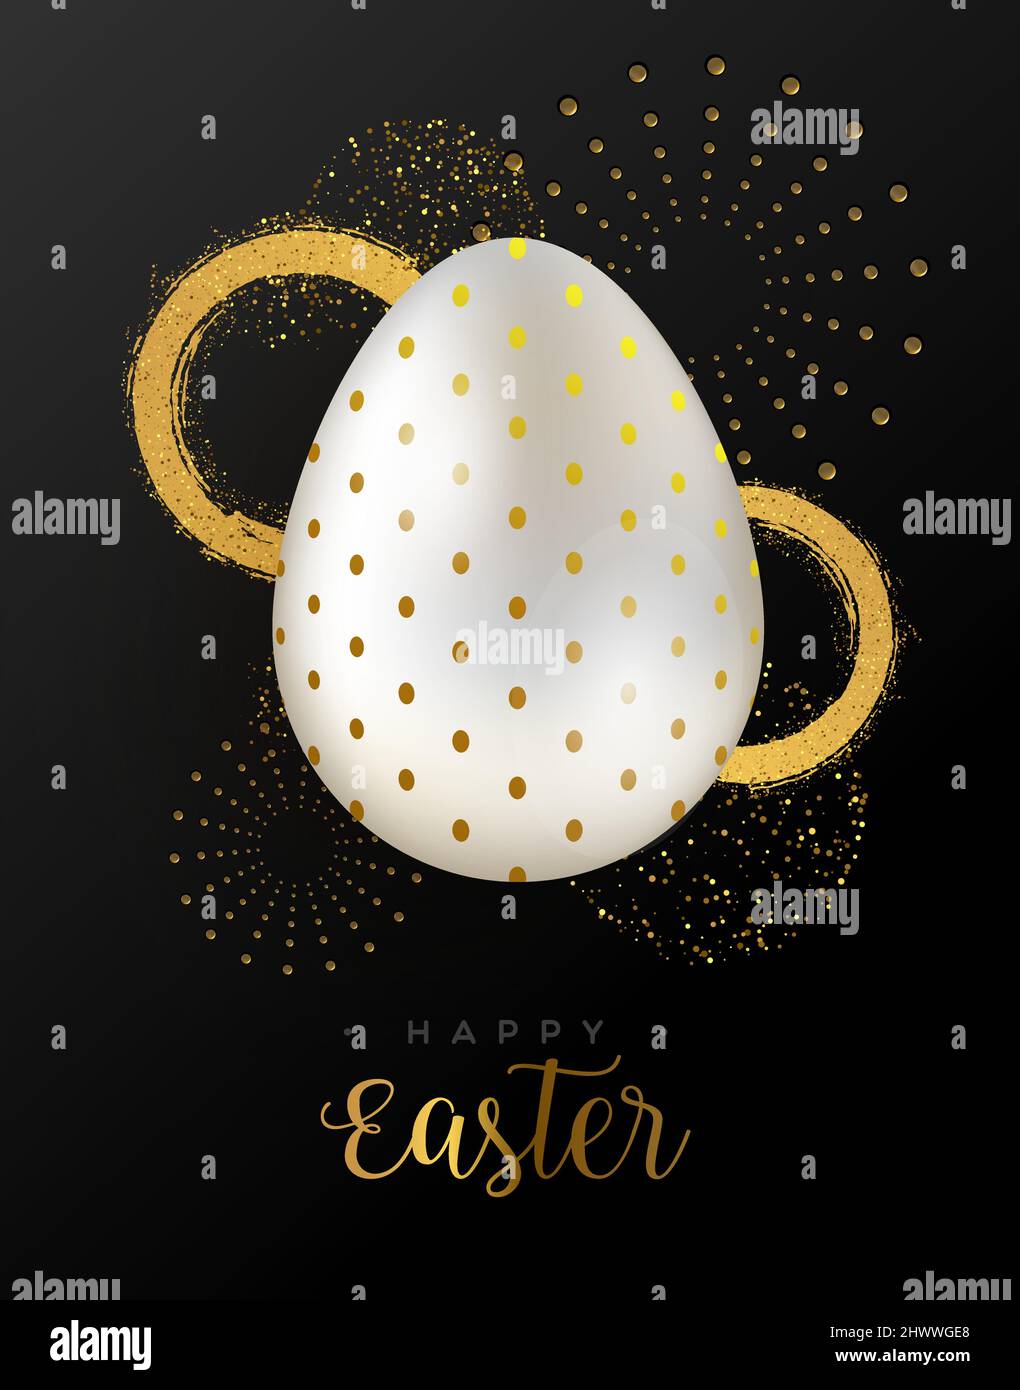 Happy Easter luxury greeting card illustration. Realistic 3d gold glitter with traditional egg for spring holiday celebration event. Stock Vector